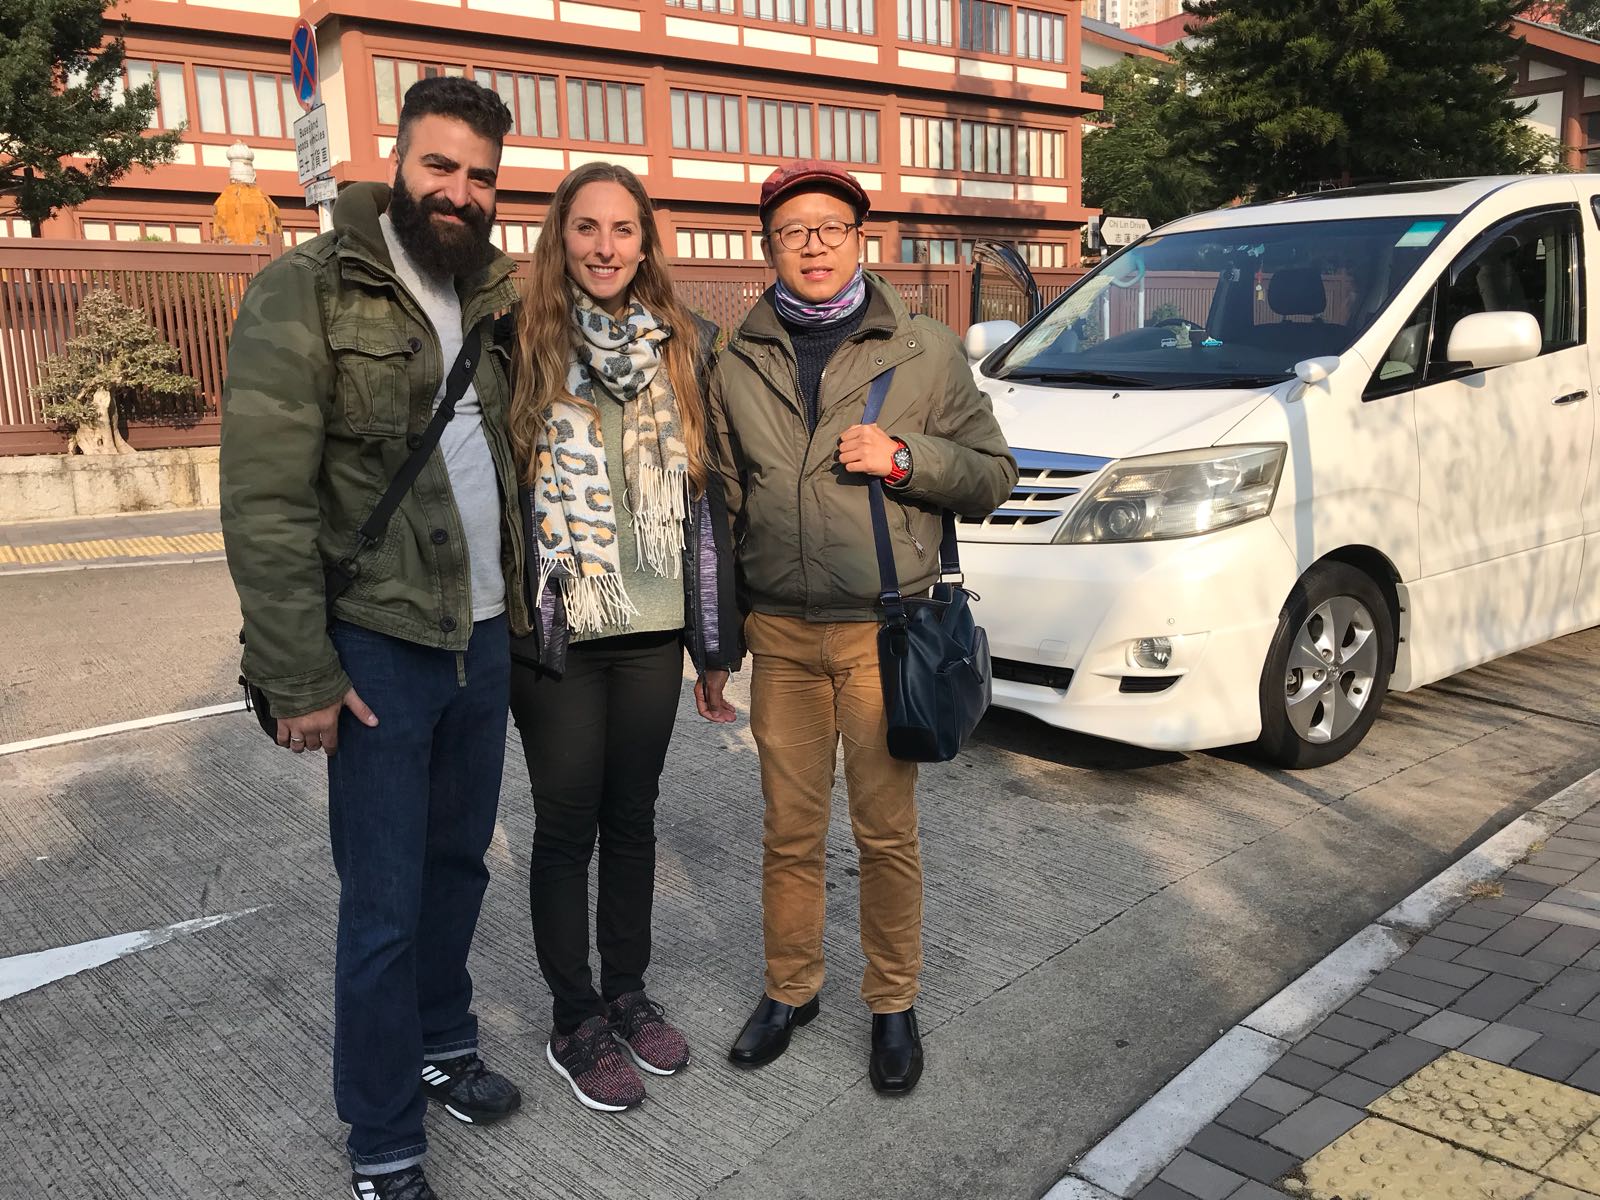 Frank the tour guide takes photo with a young couple client near the private car.